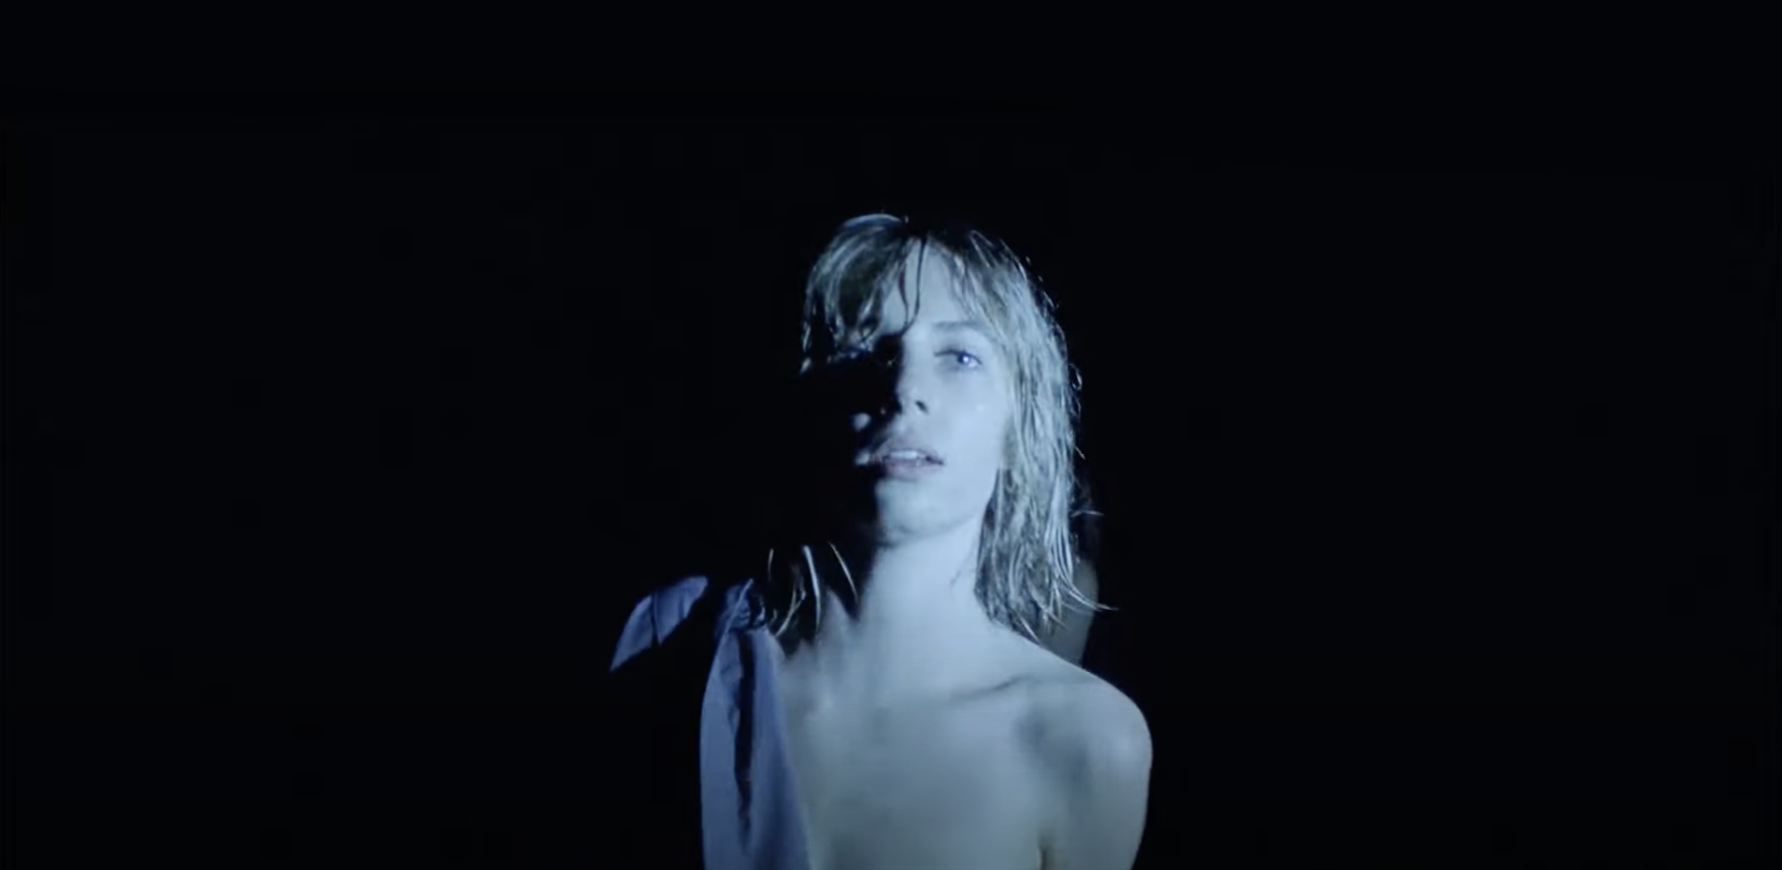 Maya Hawke standing topless in the dark with a shirt draped over her shoulder.